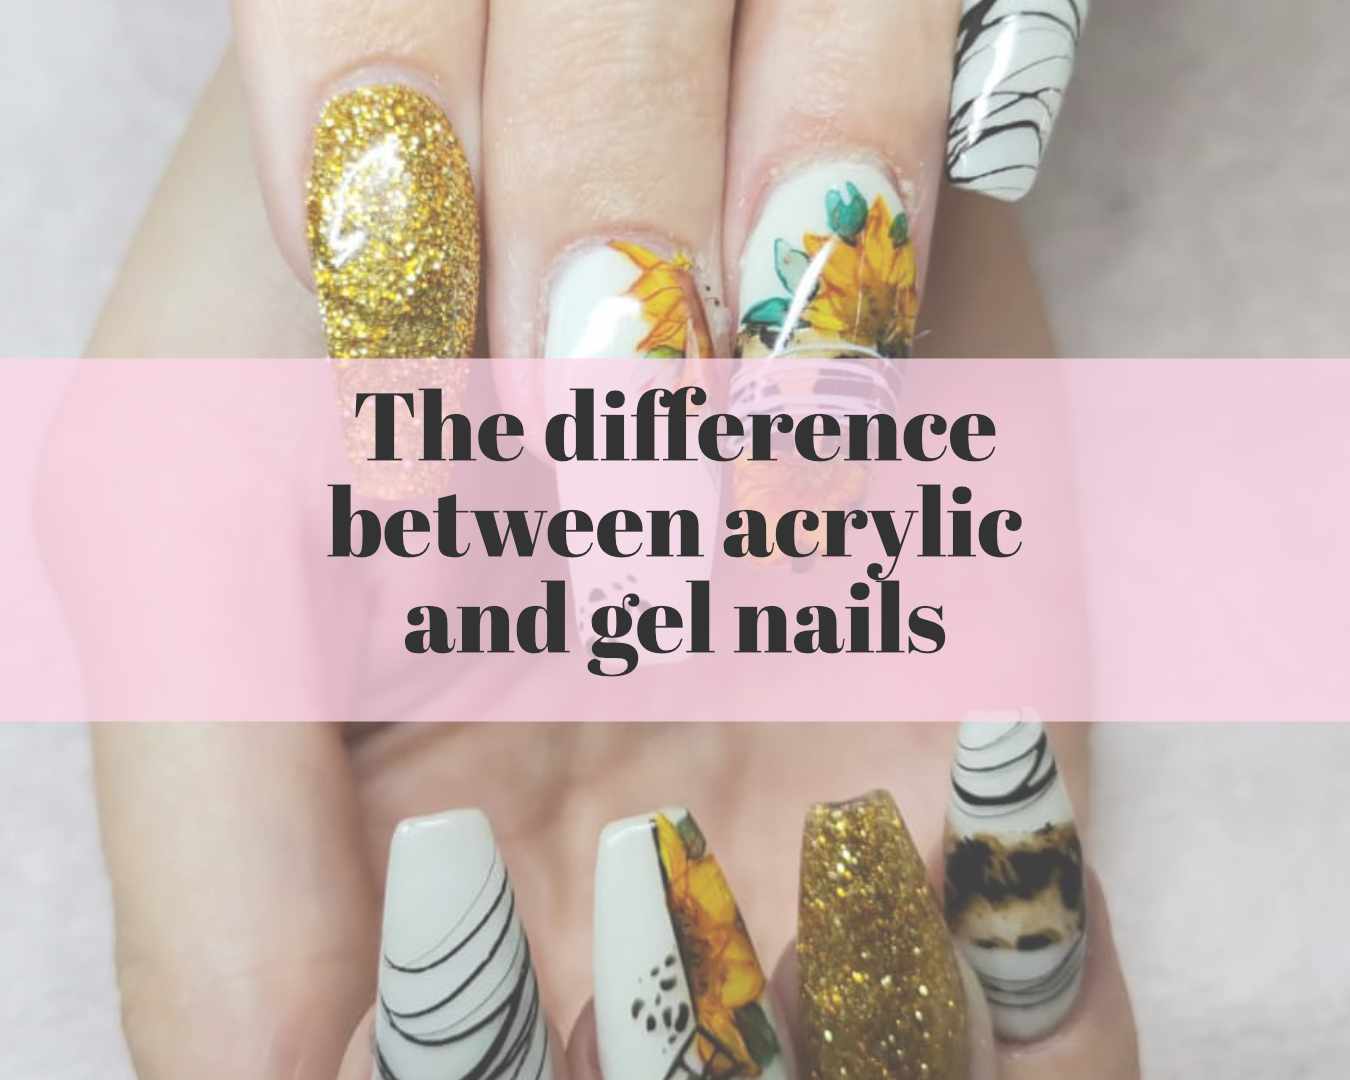 The difference between acrylic and gel nails